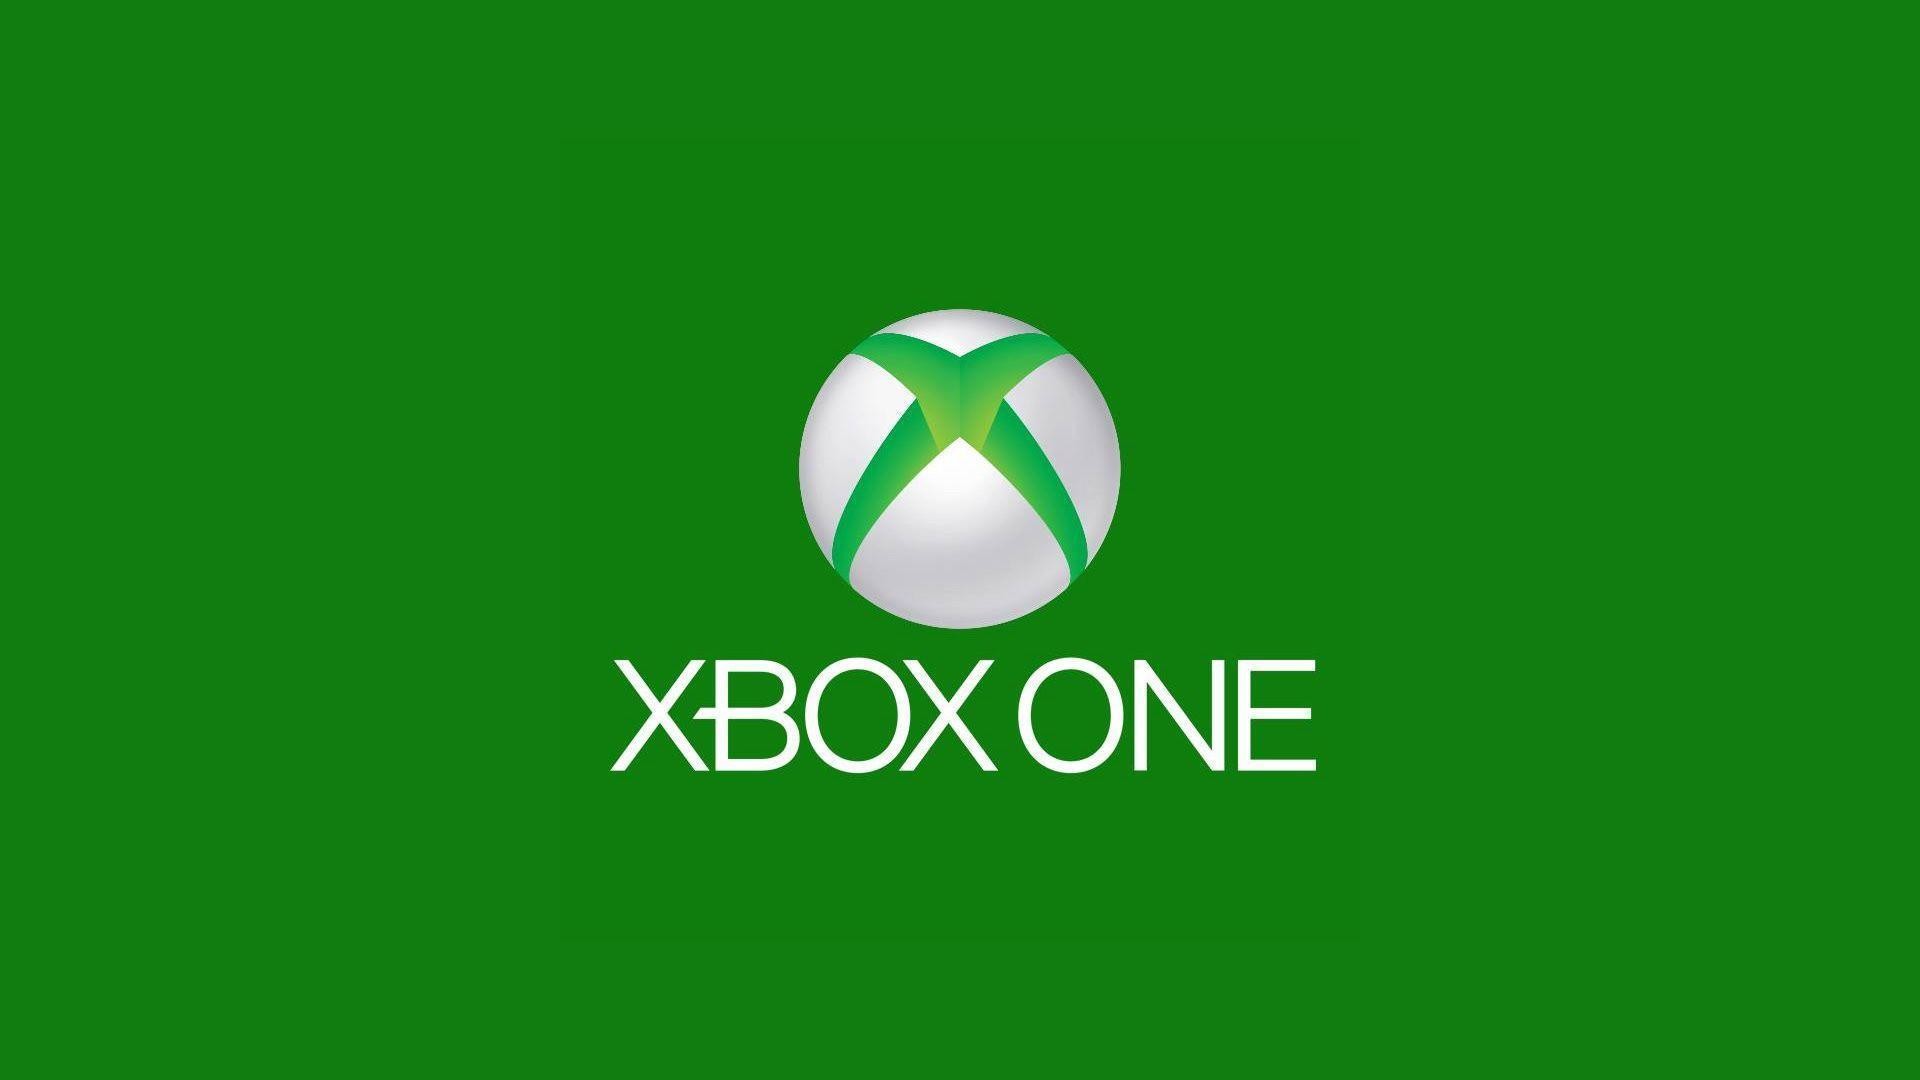 1920x1080 Xbox One Wallpapers - HD Wallpapers Inn